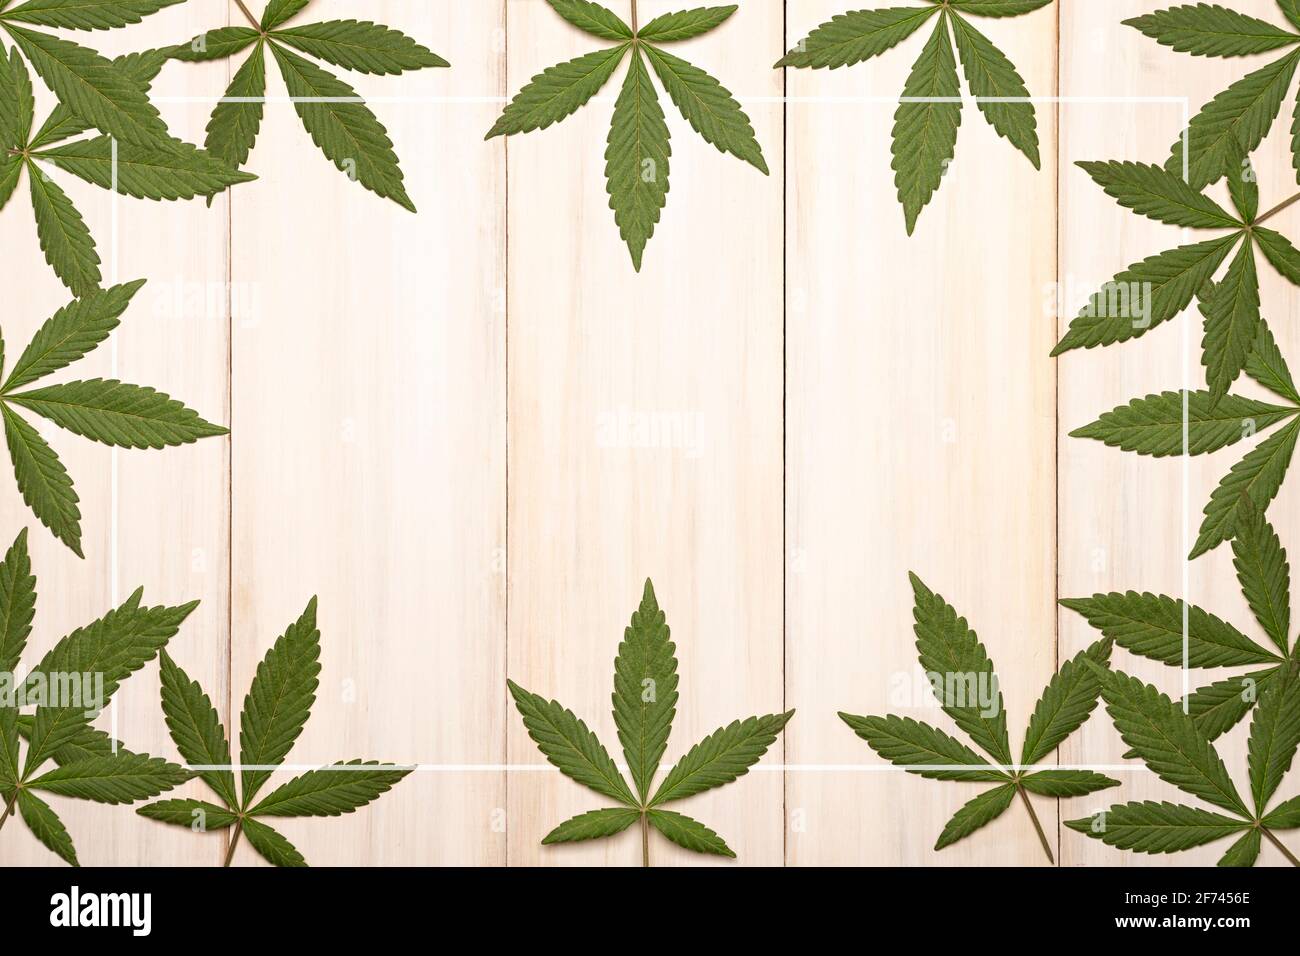 green fresh cannabis sativa leafleaves(marijuana) framing a rustic white wooden background with copy space Stock Photo